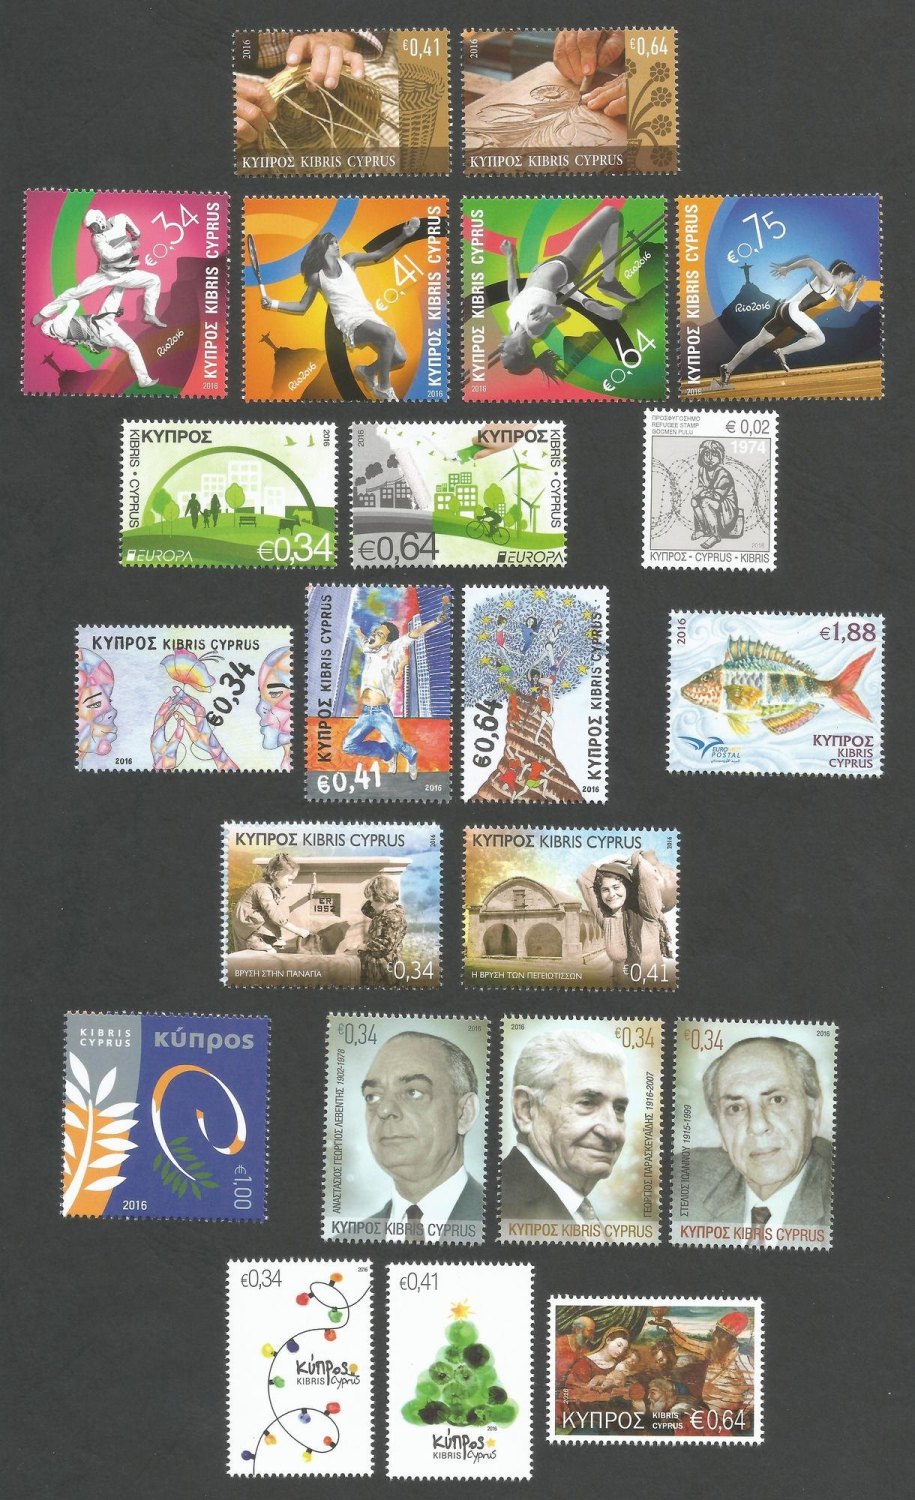 Cyprus Stamps 2016 Complete Year Set - (Booklet not included) MINT